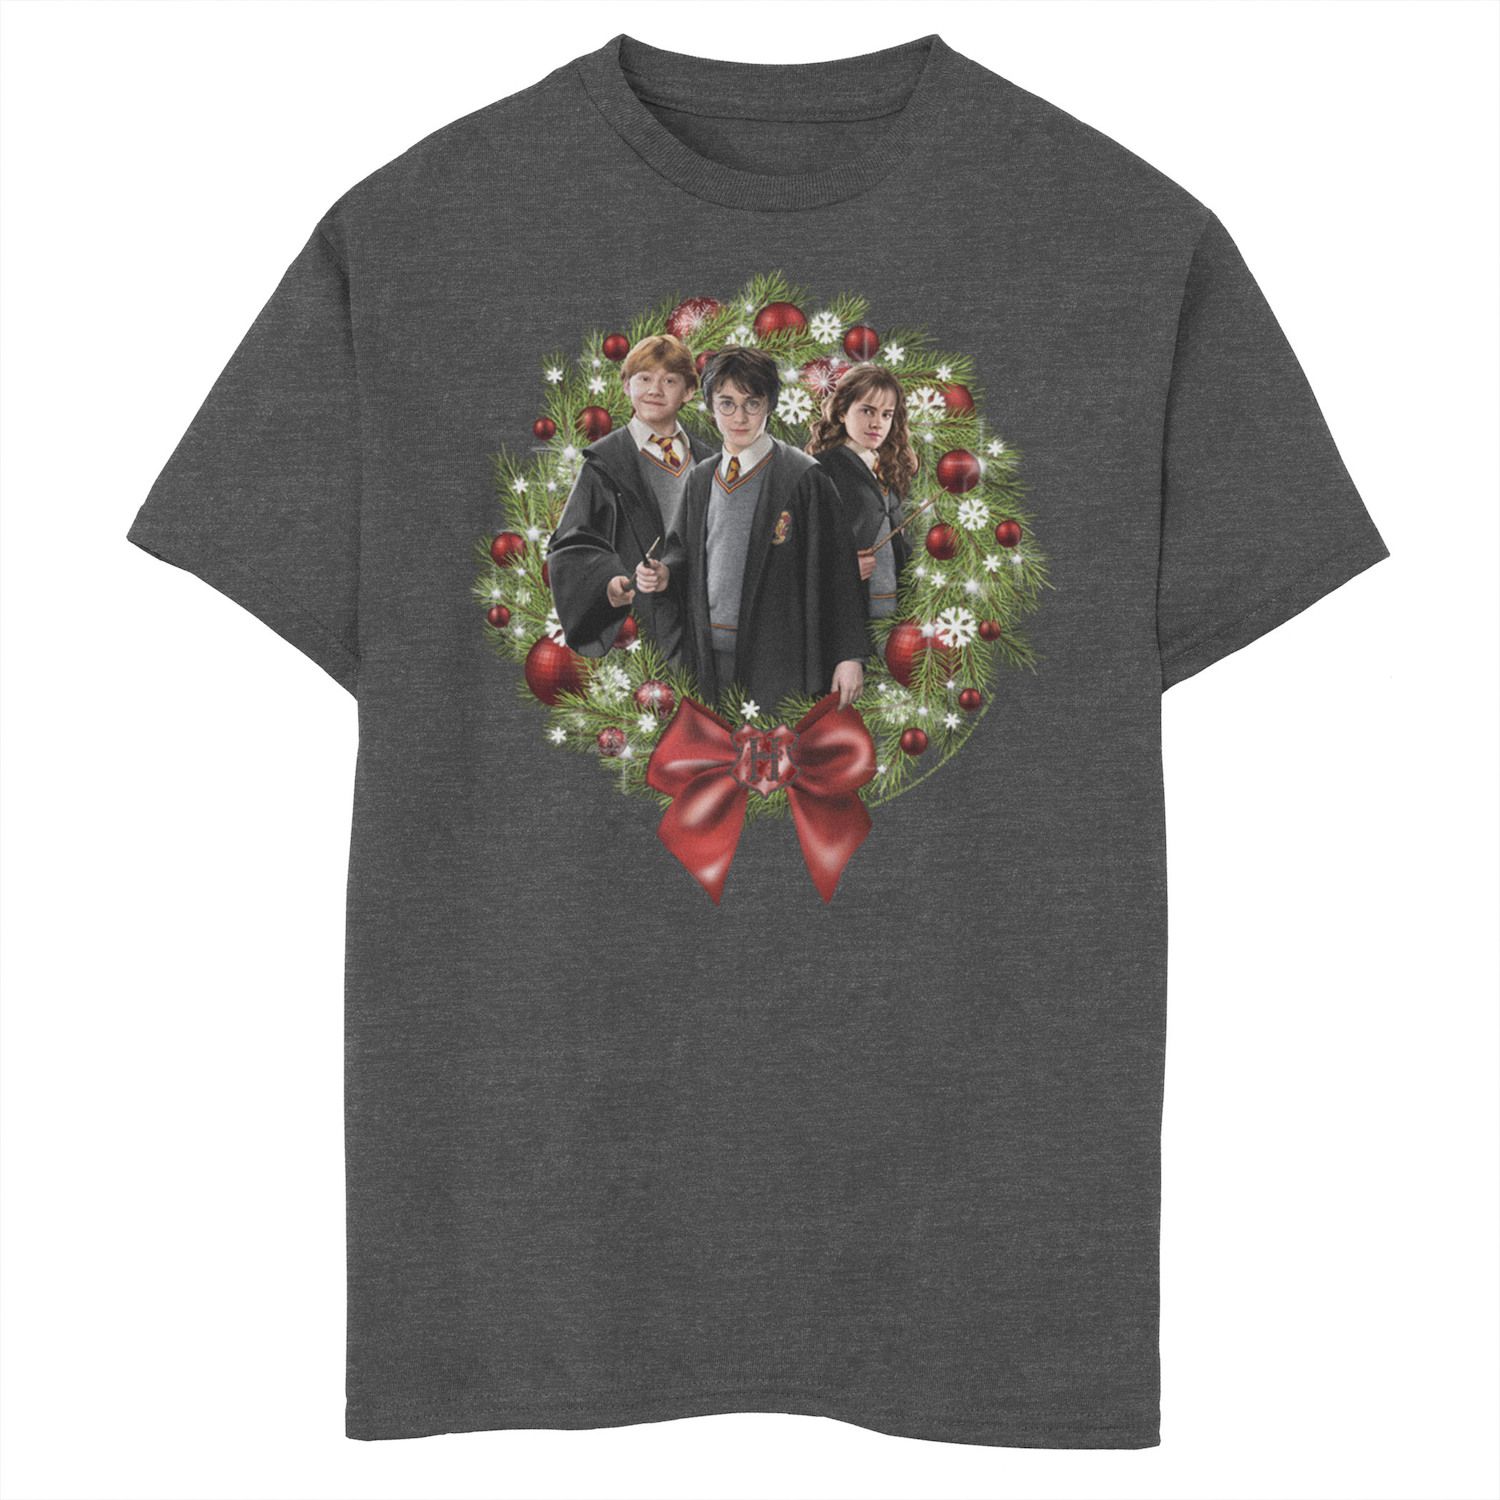 Image for Harry Potter Boys 8-20 Christmas Group Shot Wreath Graphic Tee at Kohl's.